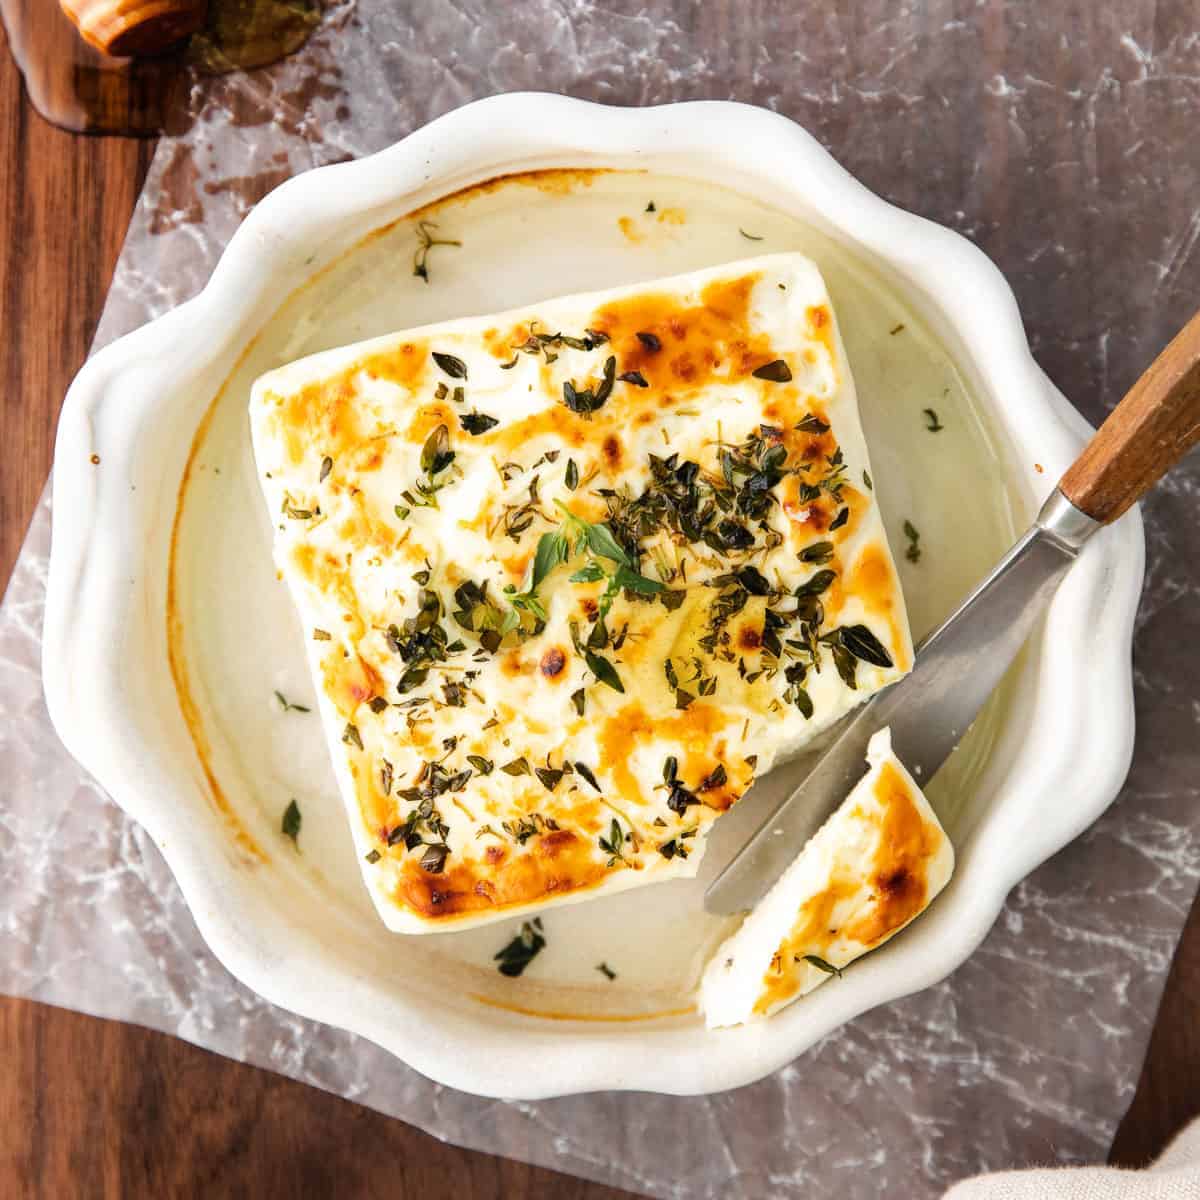 Delicious Grilled Feta (Marinated Feta!)- The Cheese Knees